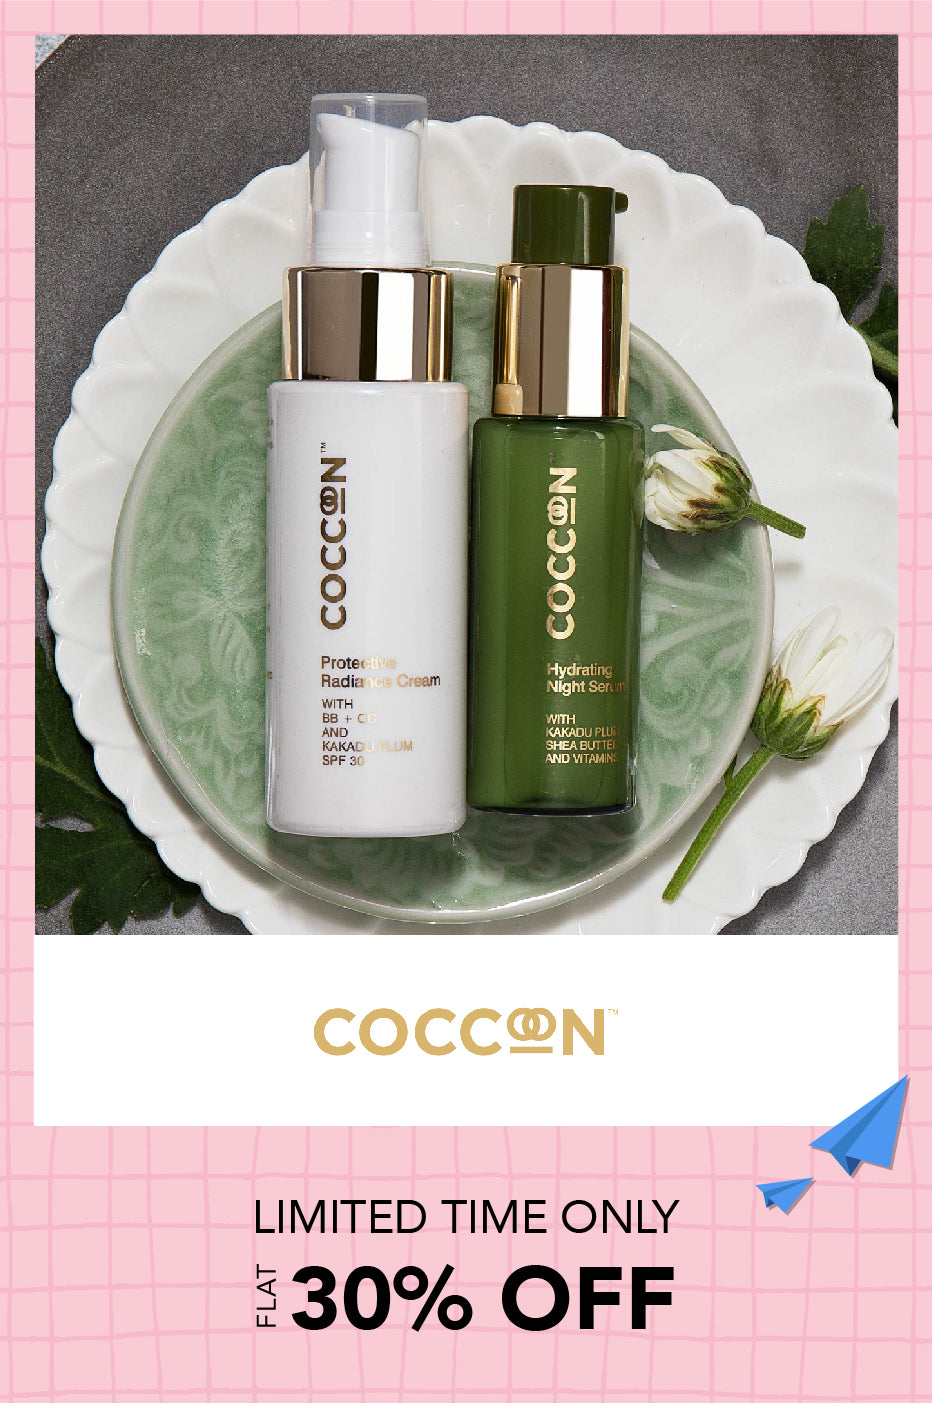 Shop for natural, non-toxic skin care products from Coccoon on SublimeLife.in. 